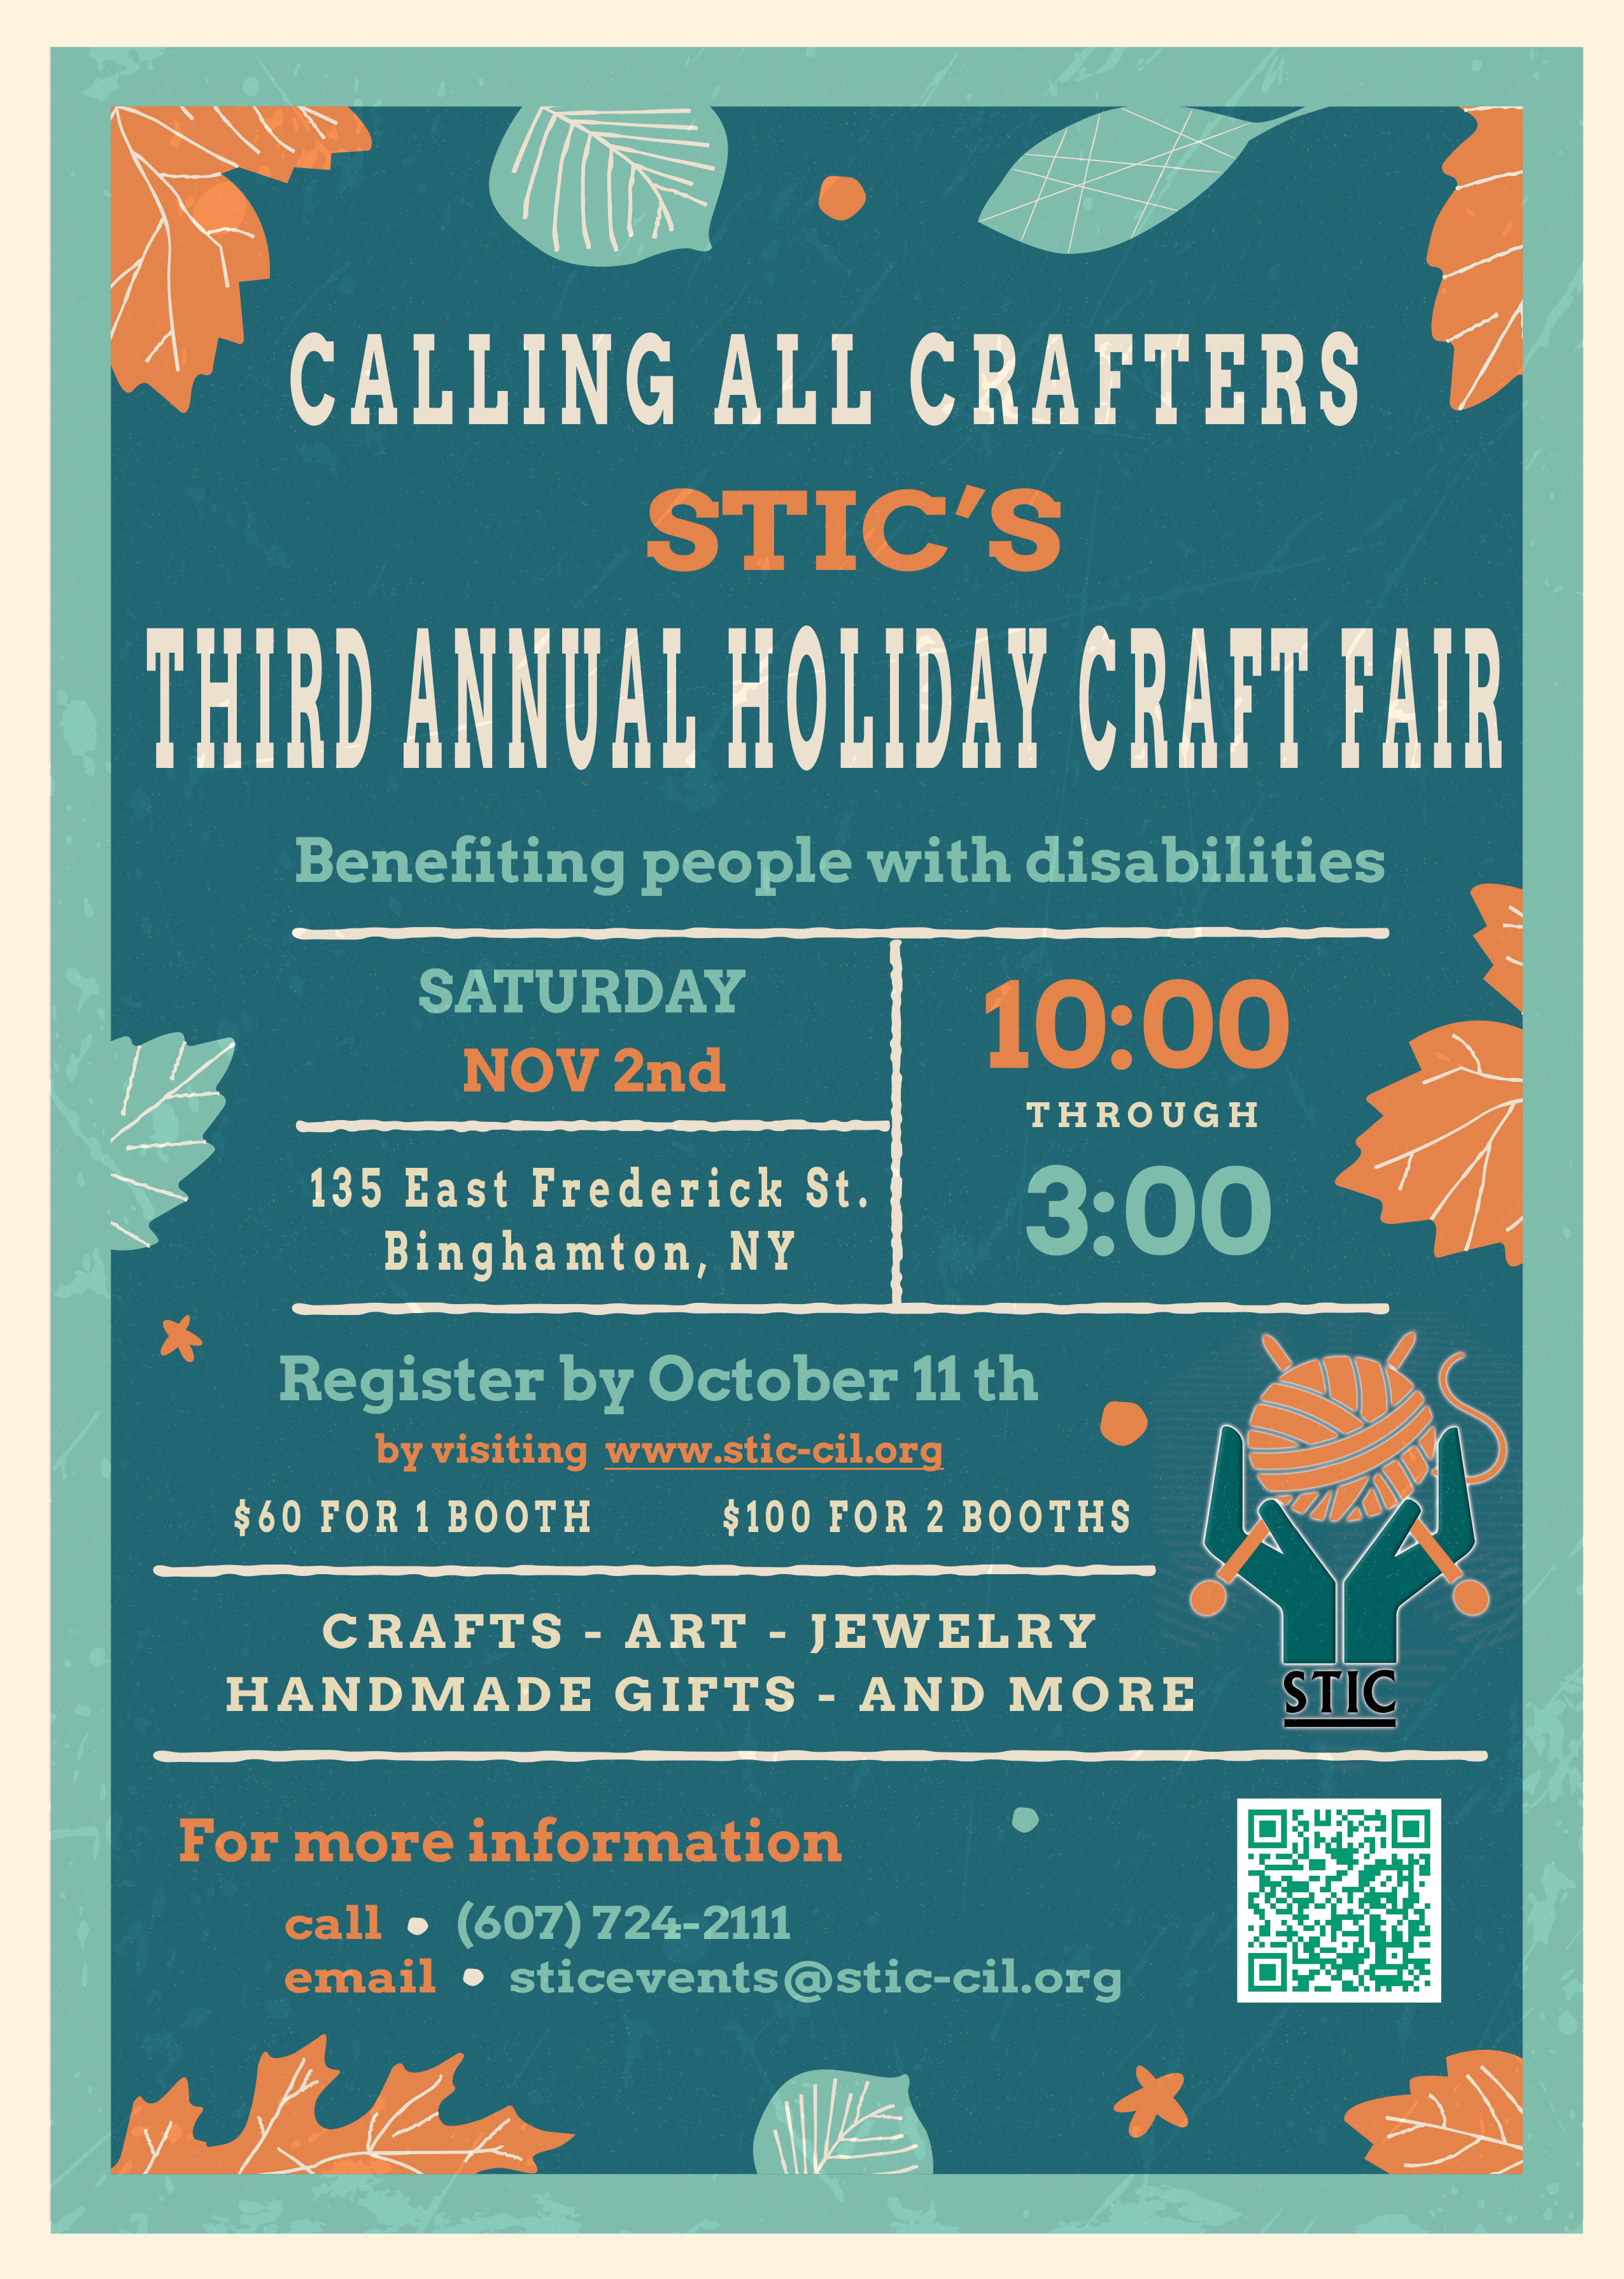 Green poster with the following text - CALLINGALLCRAFTERS STIC’S<br />
THIRDANNUALHOLIDAYCRAFTFAIR Benefitingpeoplewithdisabilities<br />
10:00 TH ROUGH<br />
3:00<br />
RegisterbyOctober1th<br />
$ 6 0 F O R 1 B O O T H $ 10 0 F O R 2 B O O T H S<br />
CRAFTS-ART-JEW ELRY<br />
H A N D M A D E G IF T S - A N D M O R E<br />
Form oreinform ation<br />
cal (607)724-21<br />
em ail sticevents@ stic-cil.org